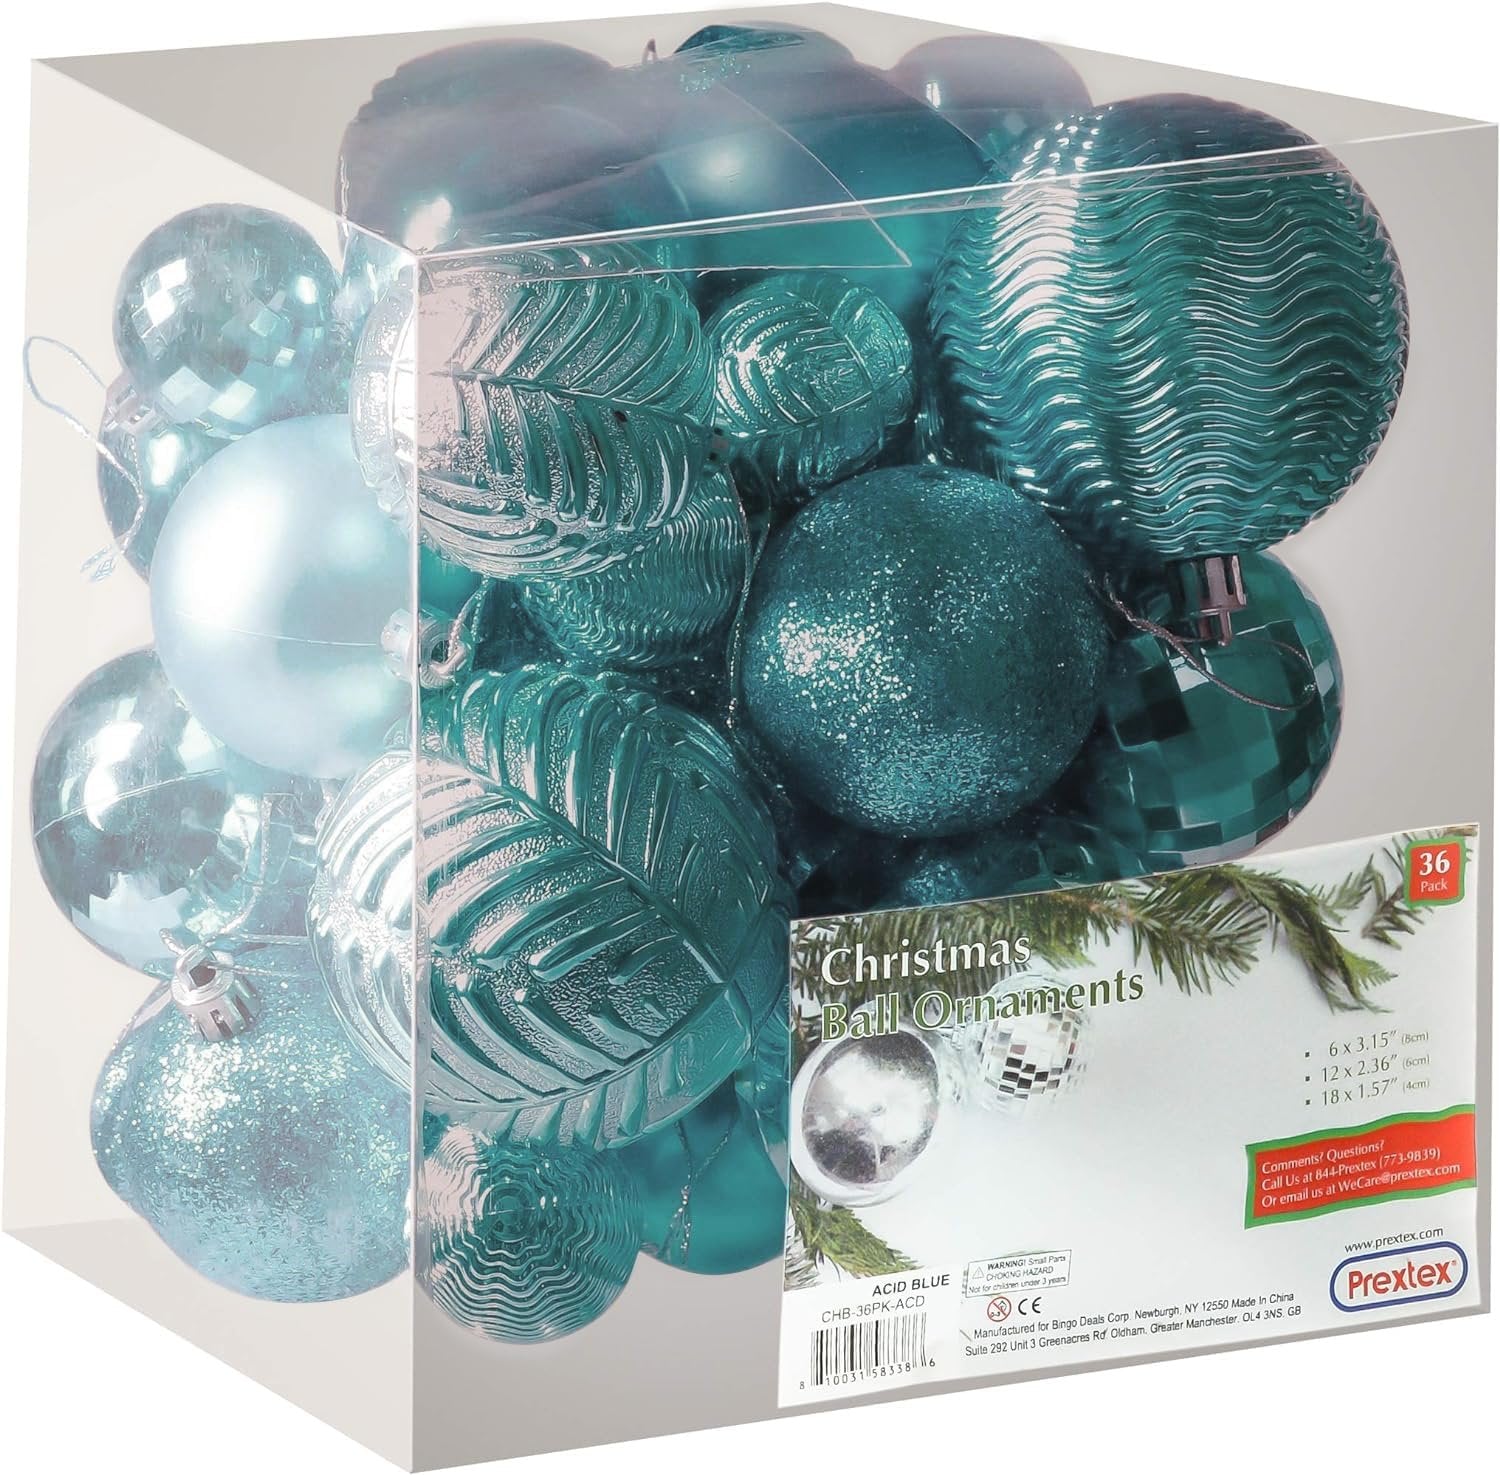 Prextex Olive Green 36-Piece Shatterproof Christmas Ball Ornament The Perfect Glitter Balls, Christmas Tree Baubles Christmas Decorations, Exquisite Xmas Combo of 36 Christmas Balls and Shape Styles